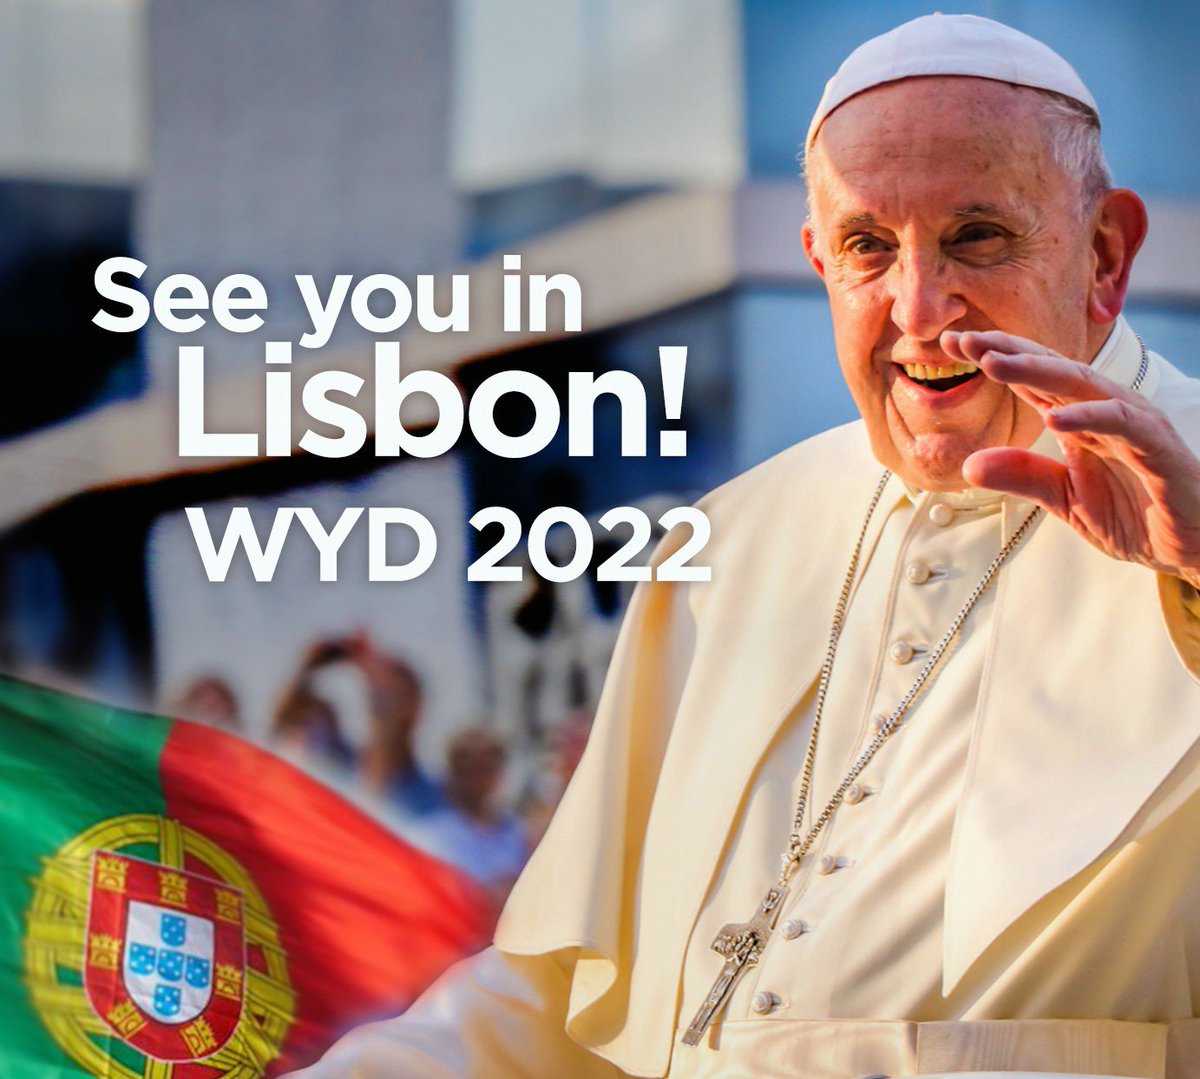 See you at the next #WorldYouthDay in Lisbon, Portugal in 2022!
#WYD2022 #JMJ2022 #Lisbon2022 #WYDisHere